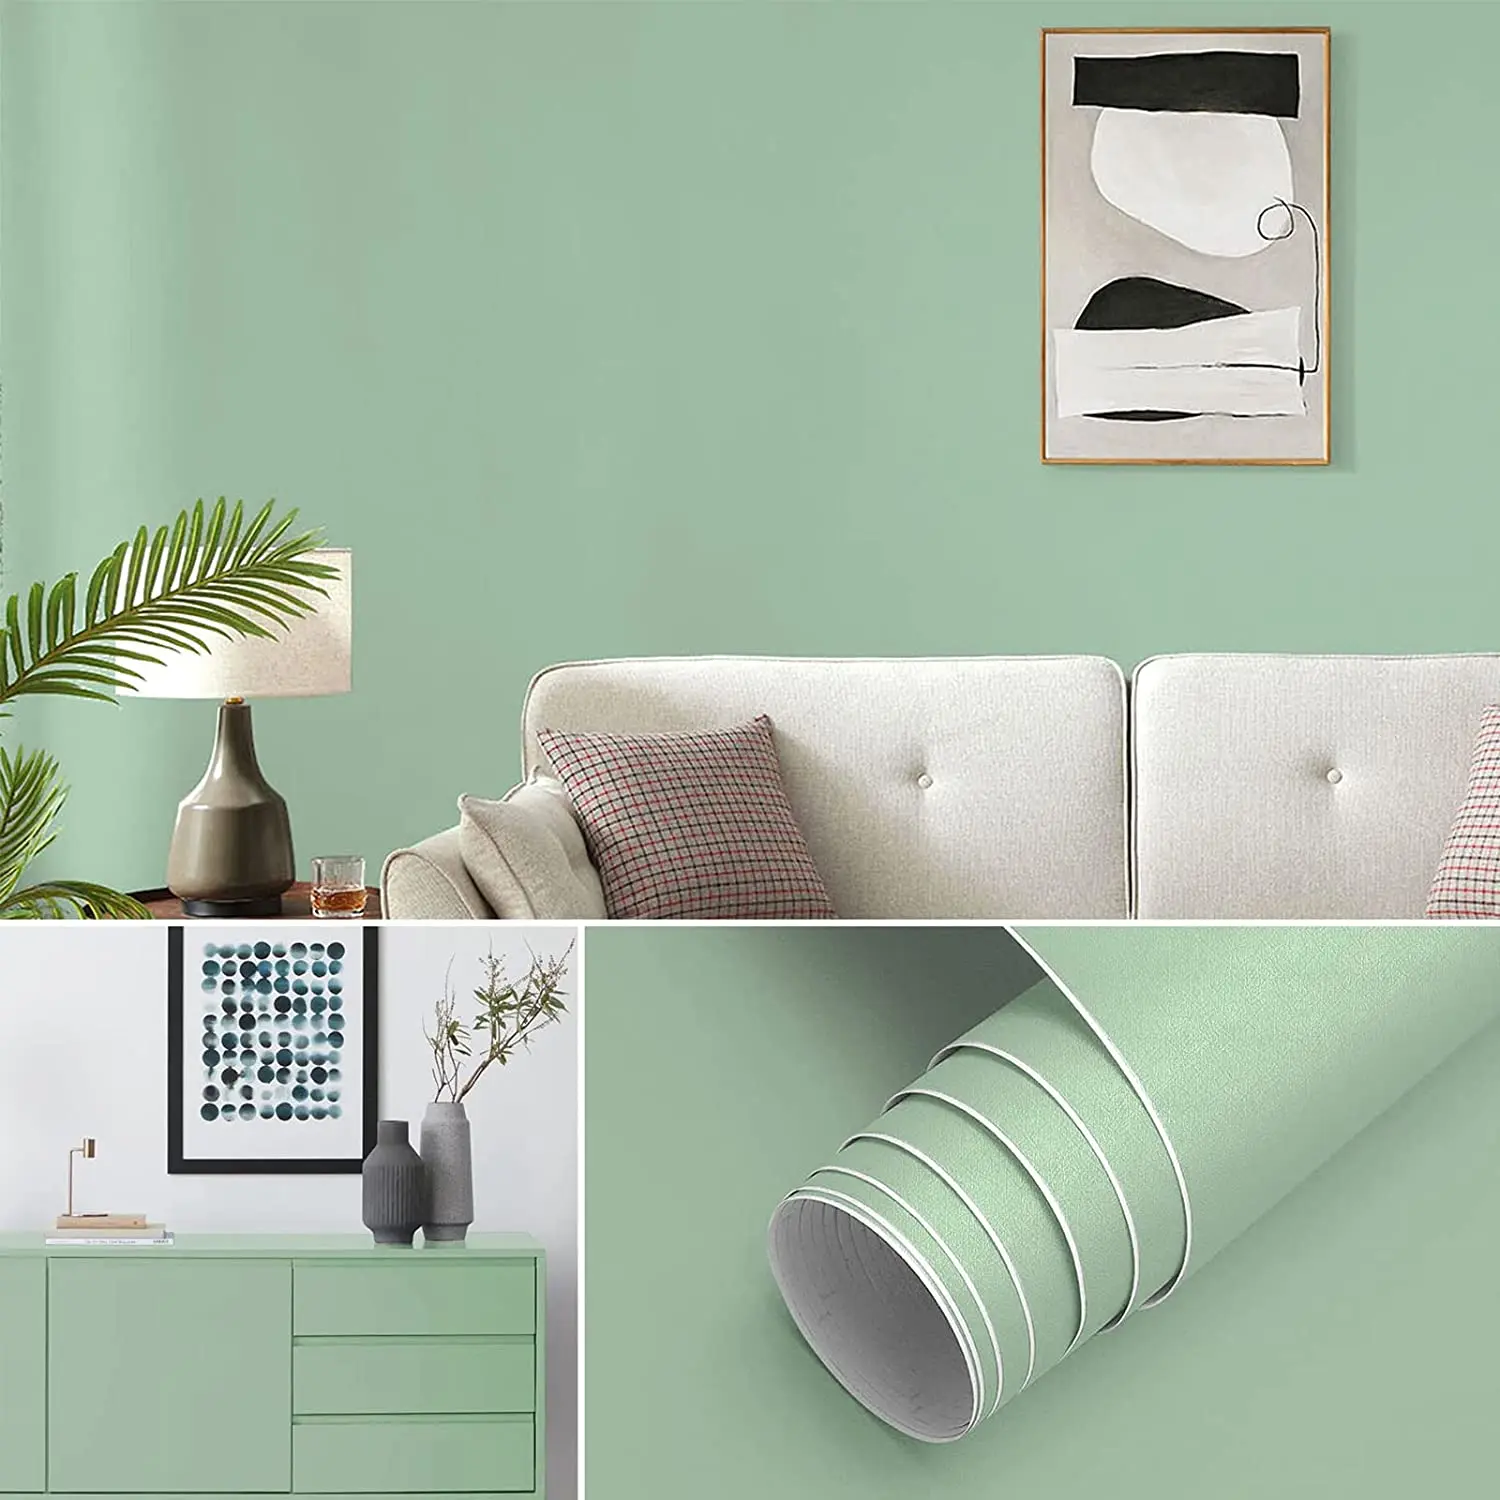 Waterproof Solid Color Bean Green Decor Wallpaper for Living Room Bedroom Walls Pvc Self Adhesive Removable Thick Stickers pvc wallpaper solid color self adhesive waterproof bedroom living room furniture stickers household decoration contact paper